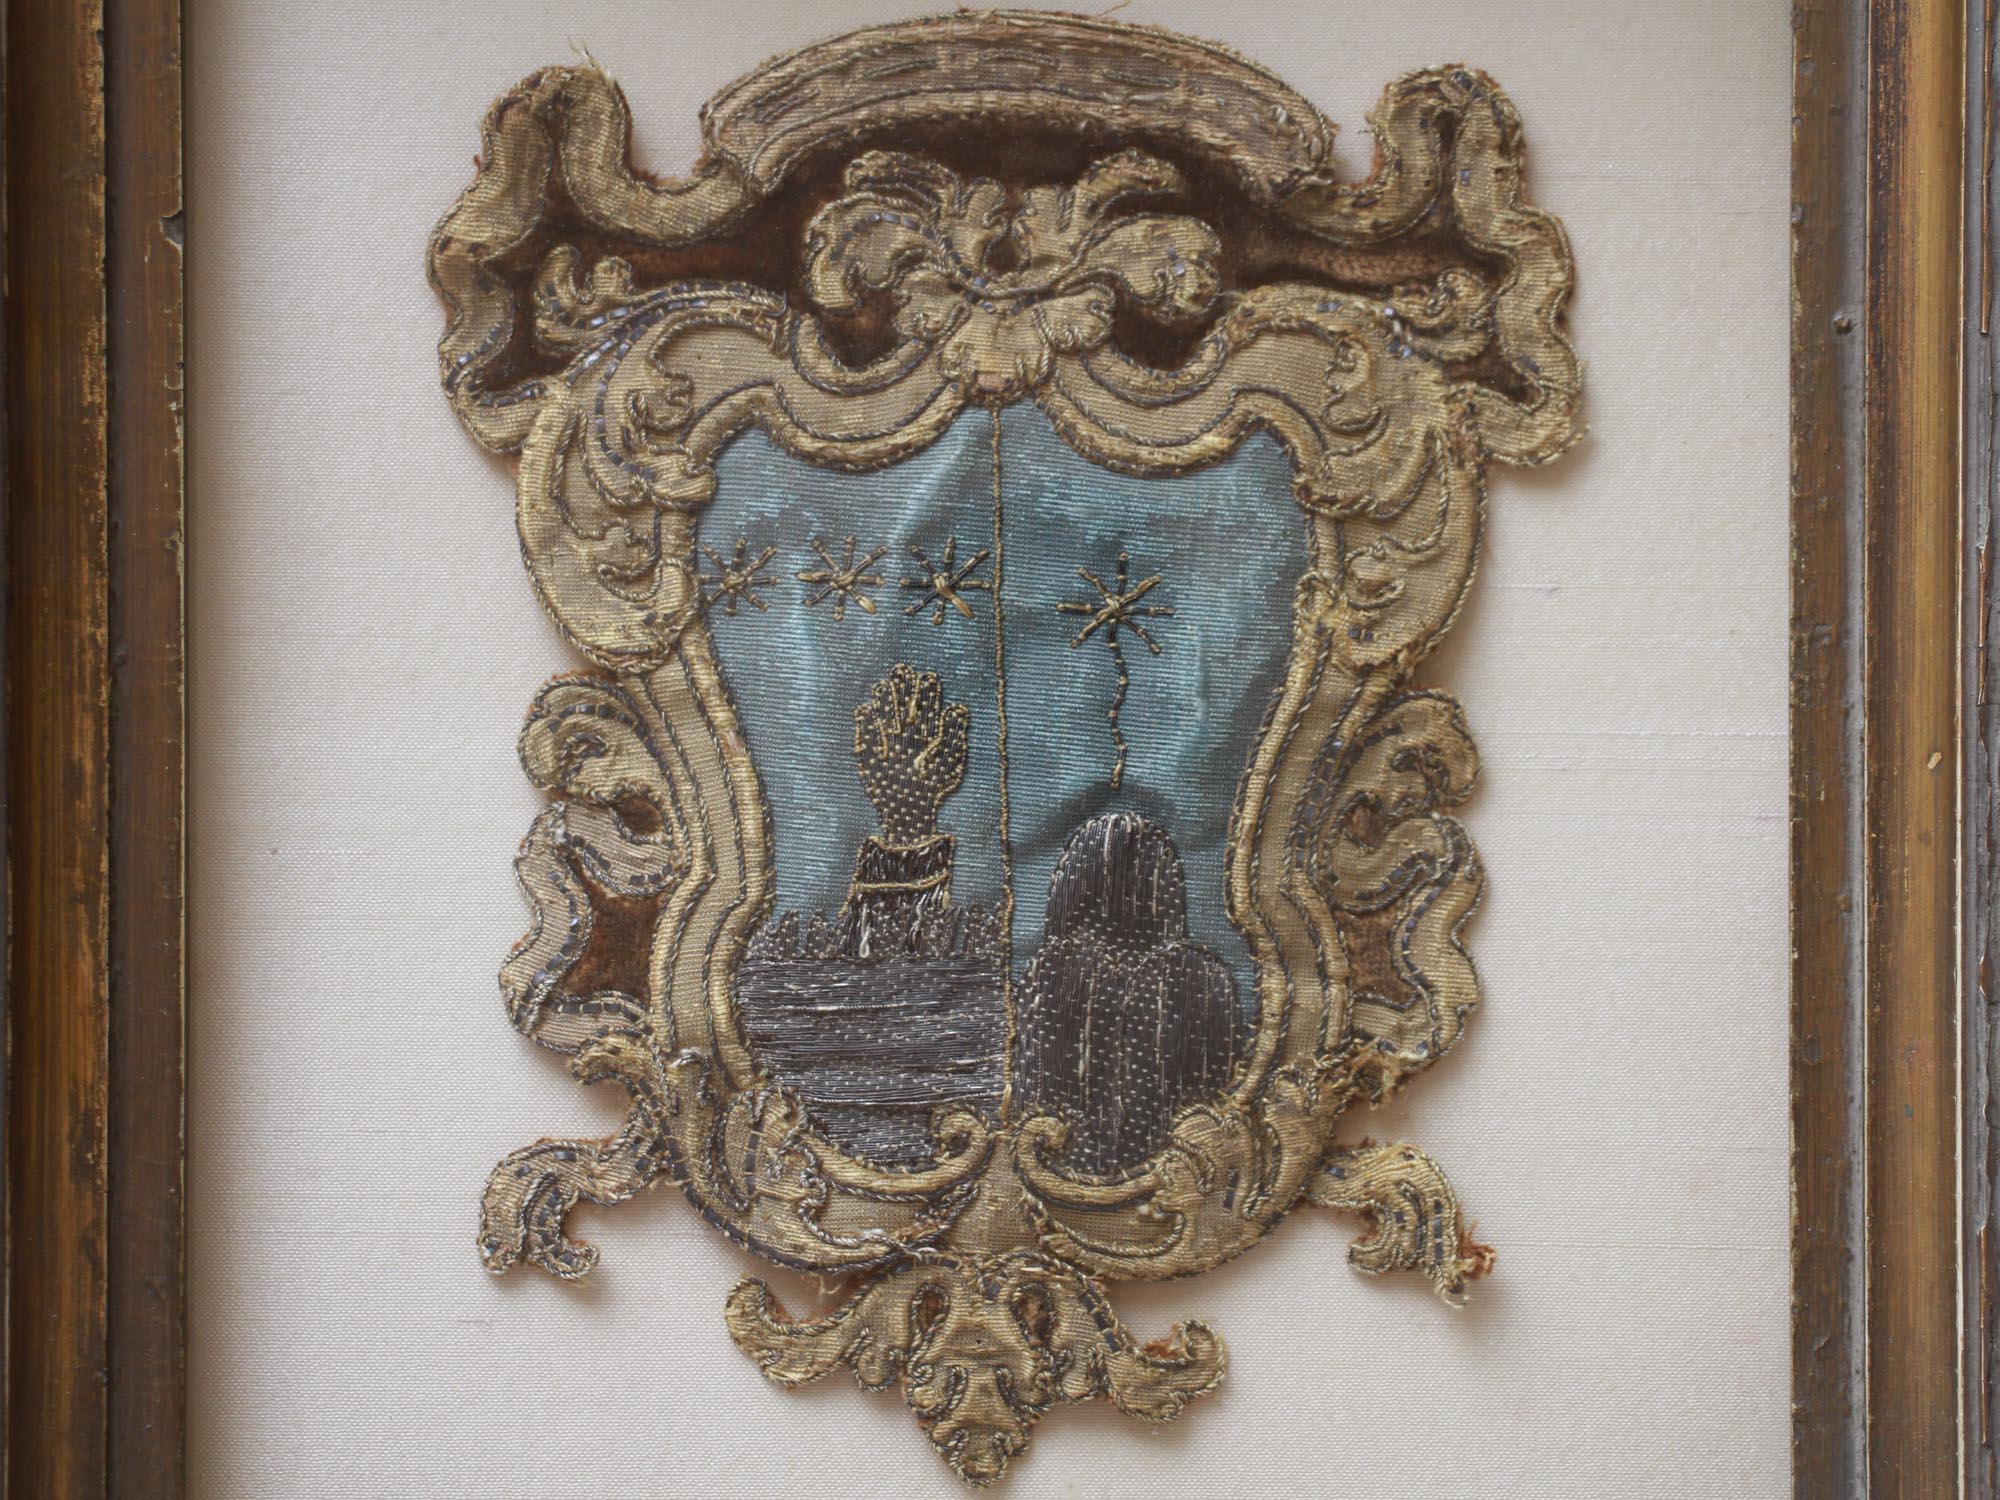 ANTIQUE FAMILY COAT OF ARMS EMBROIDERY ON FABRIC PIC-1